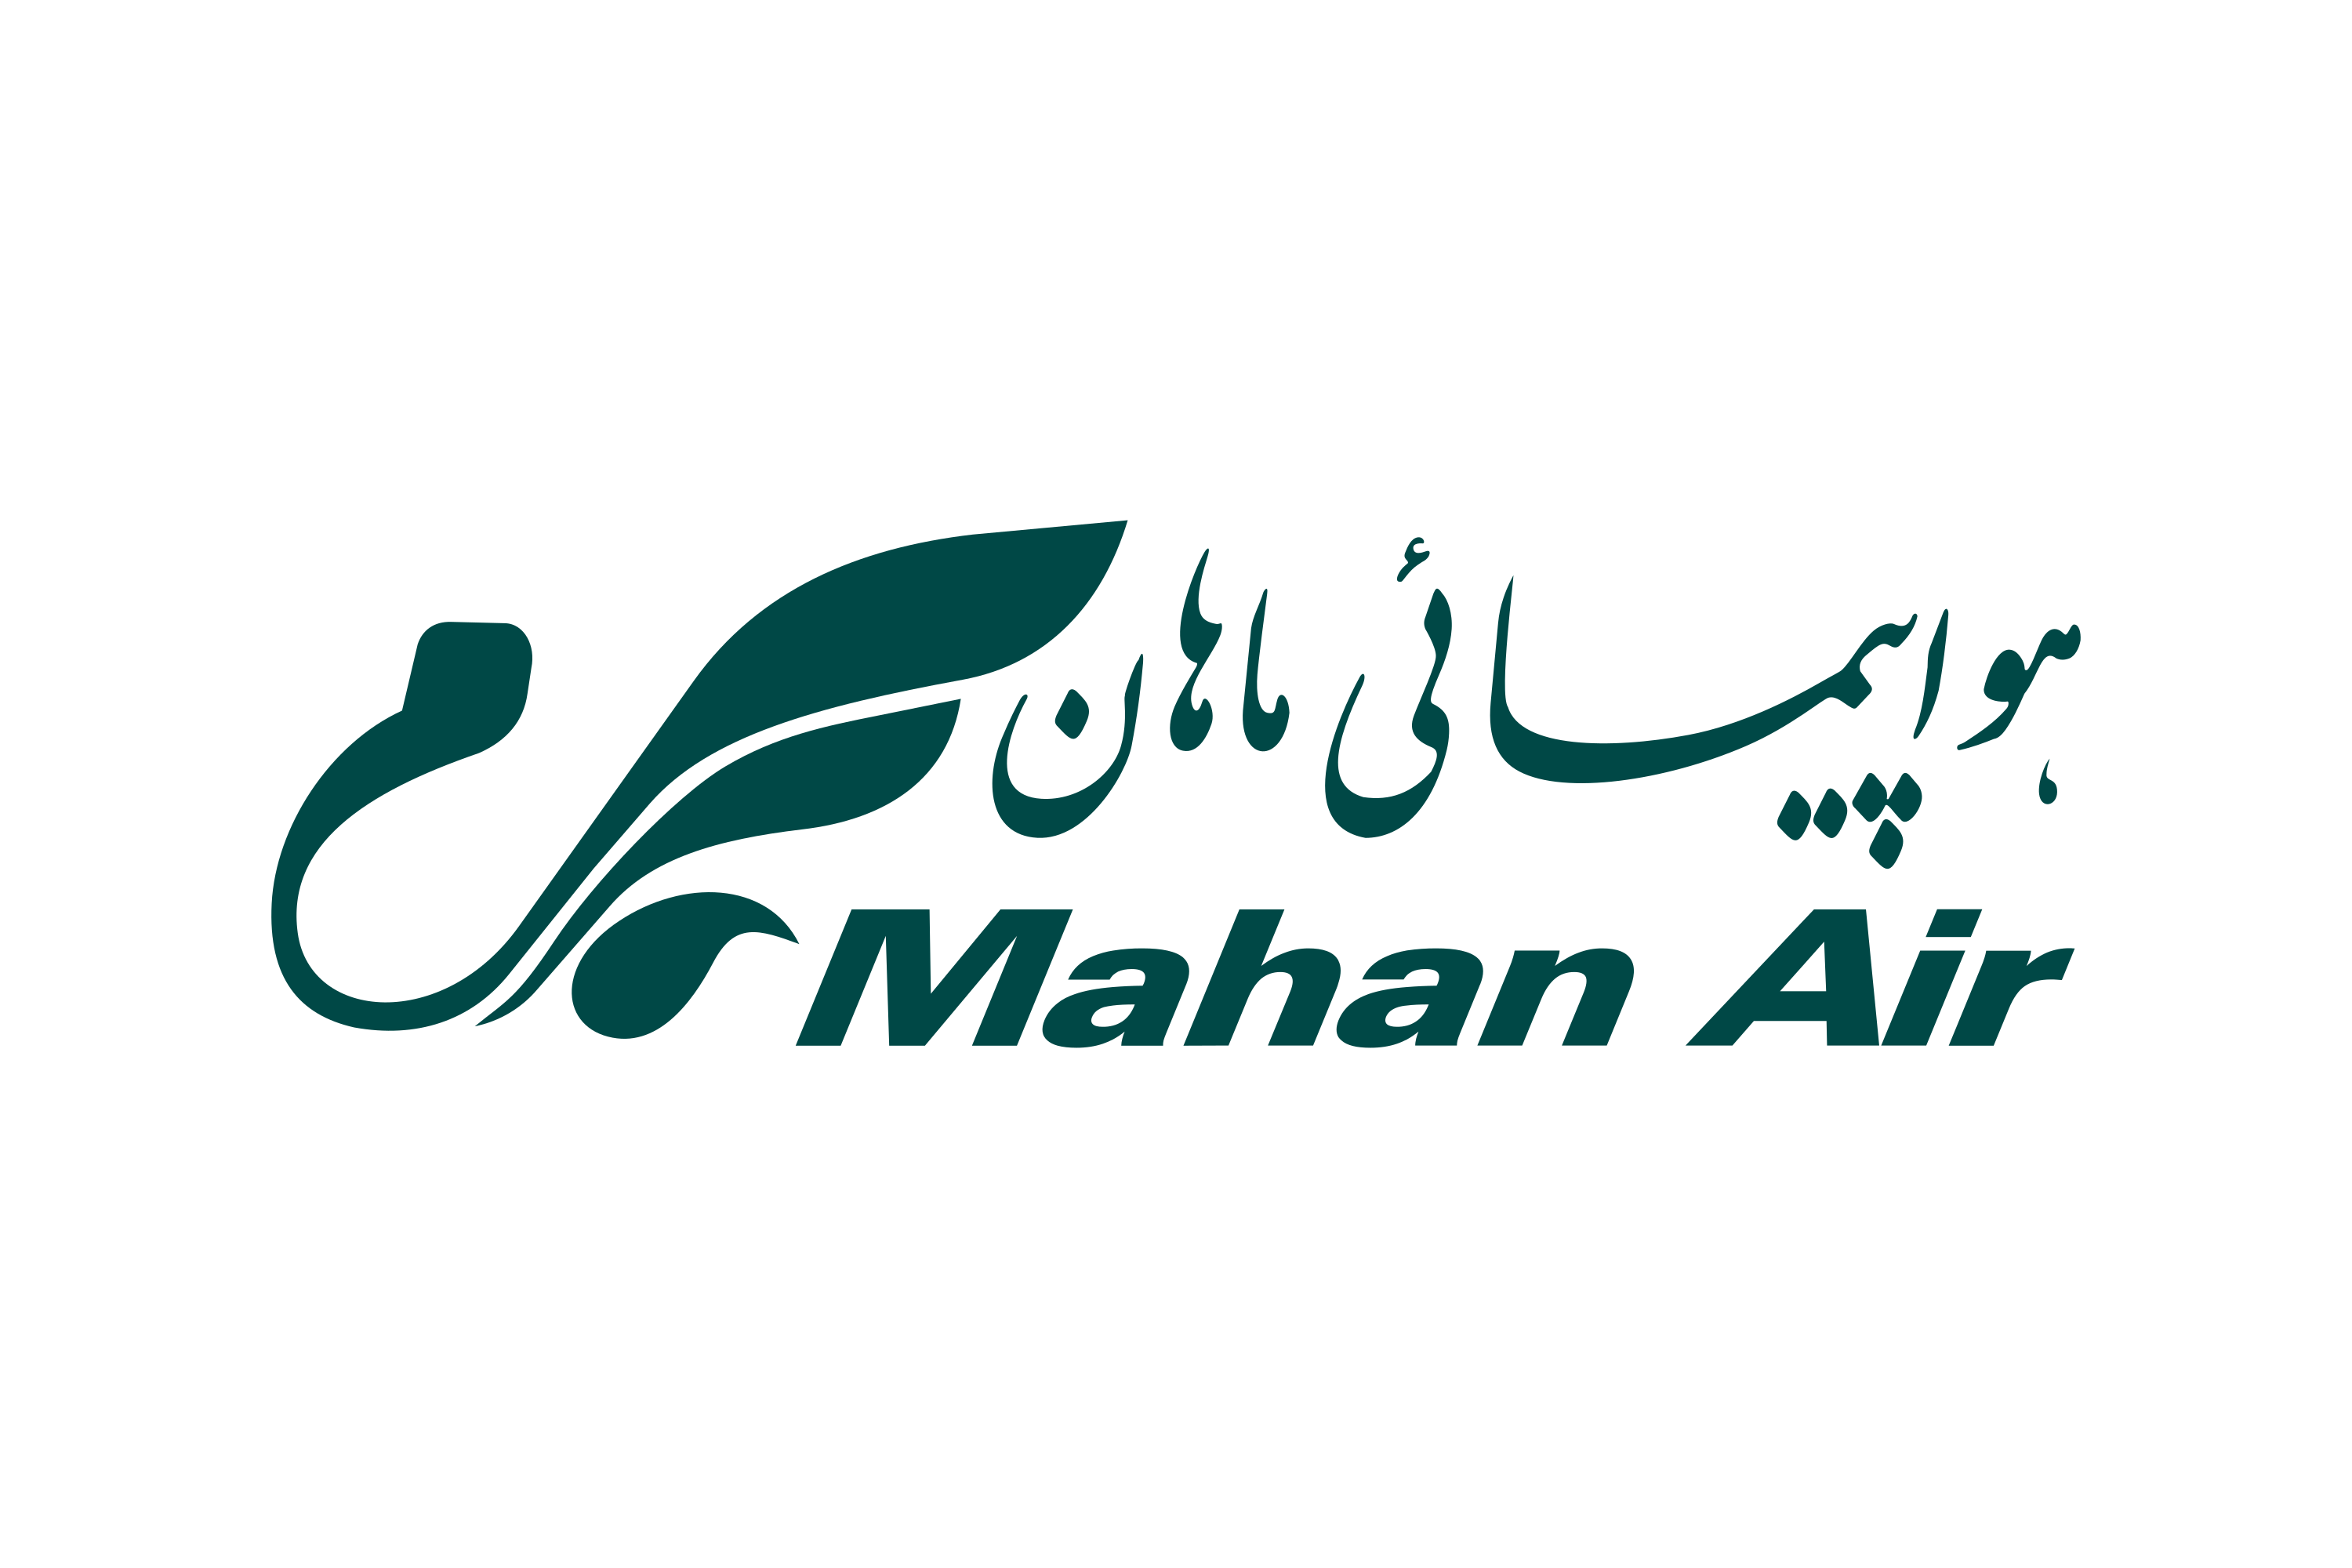 Mahan Airlines